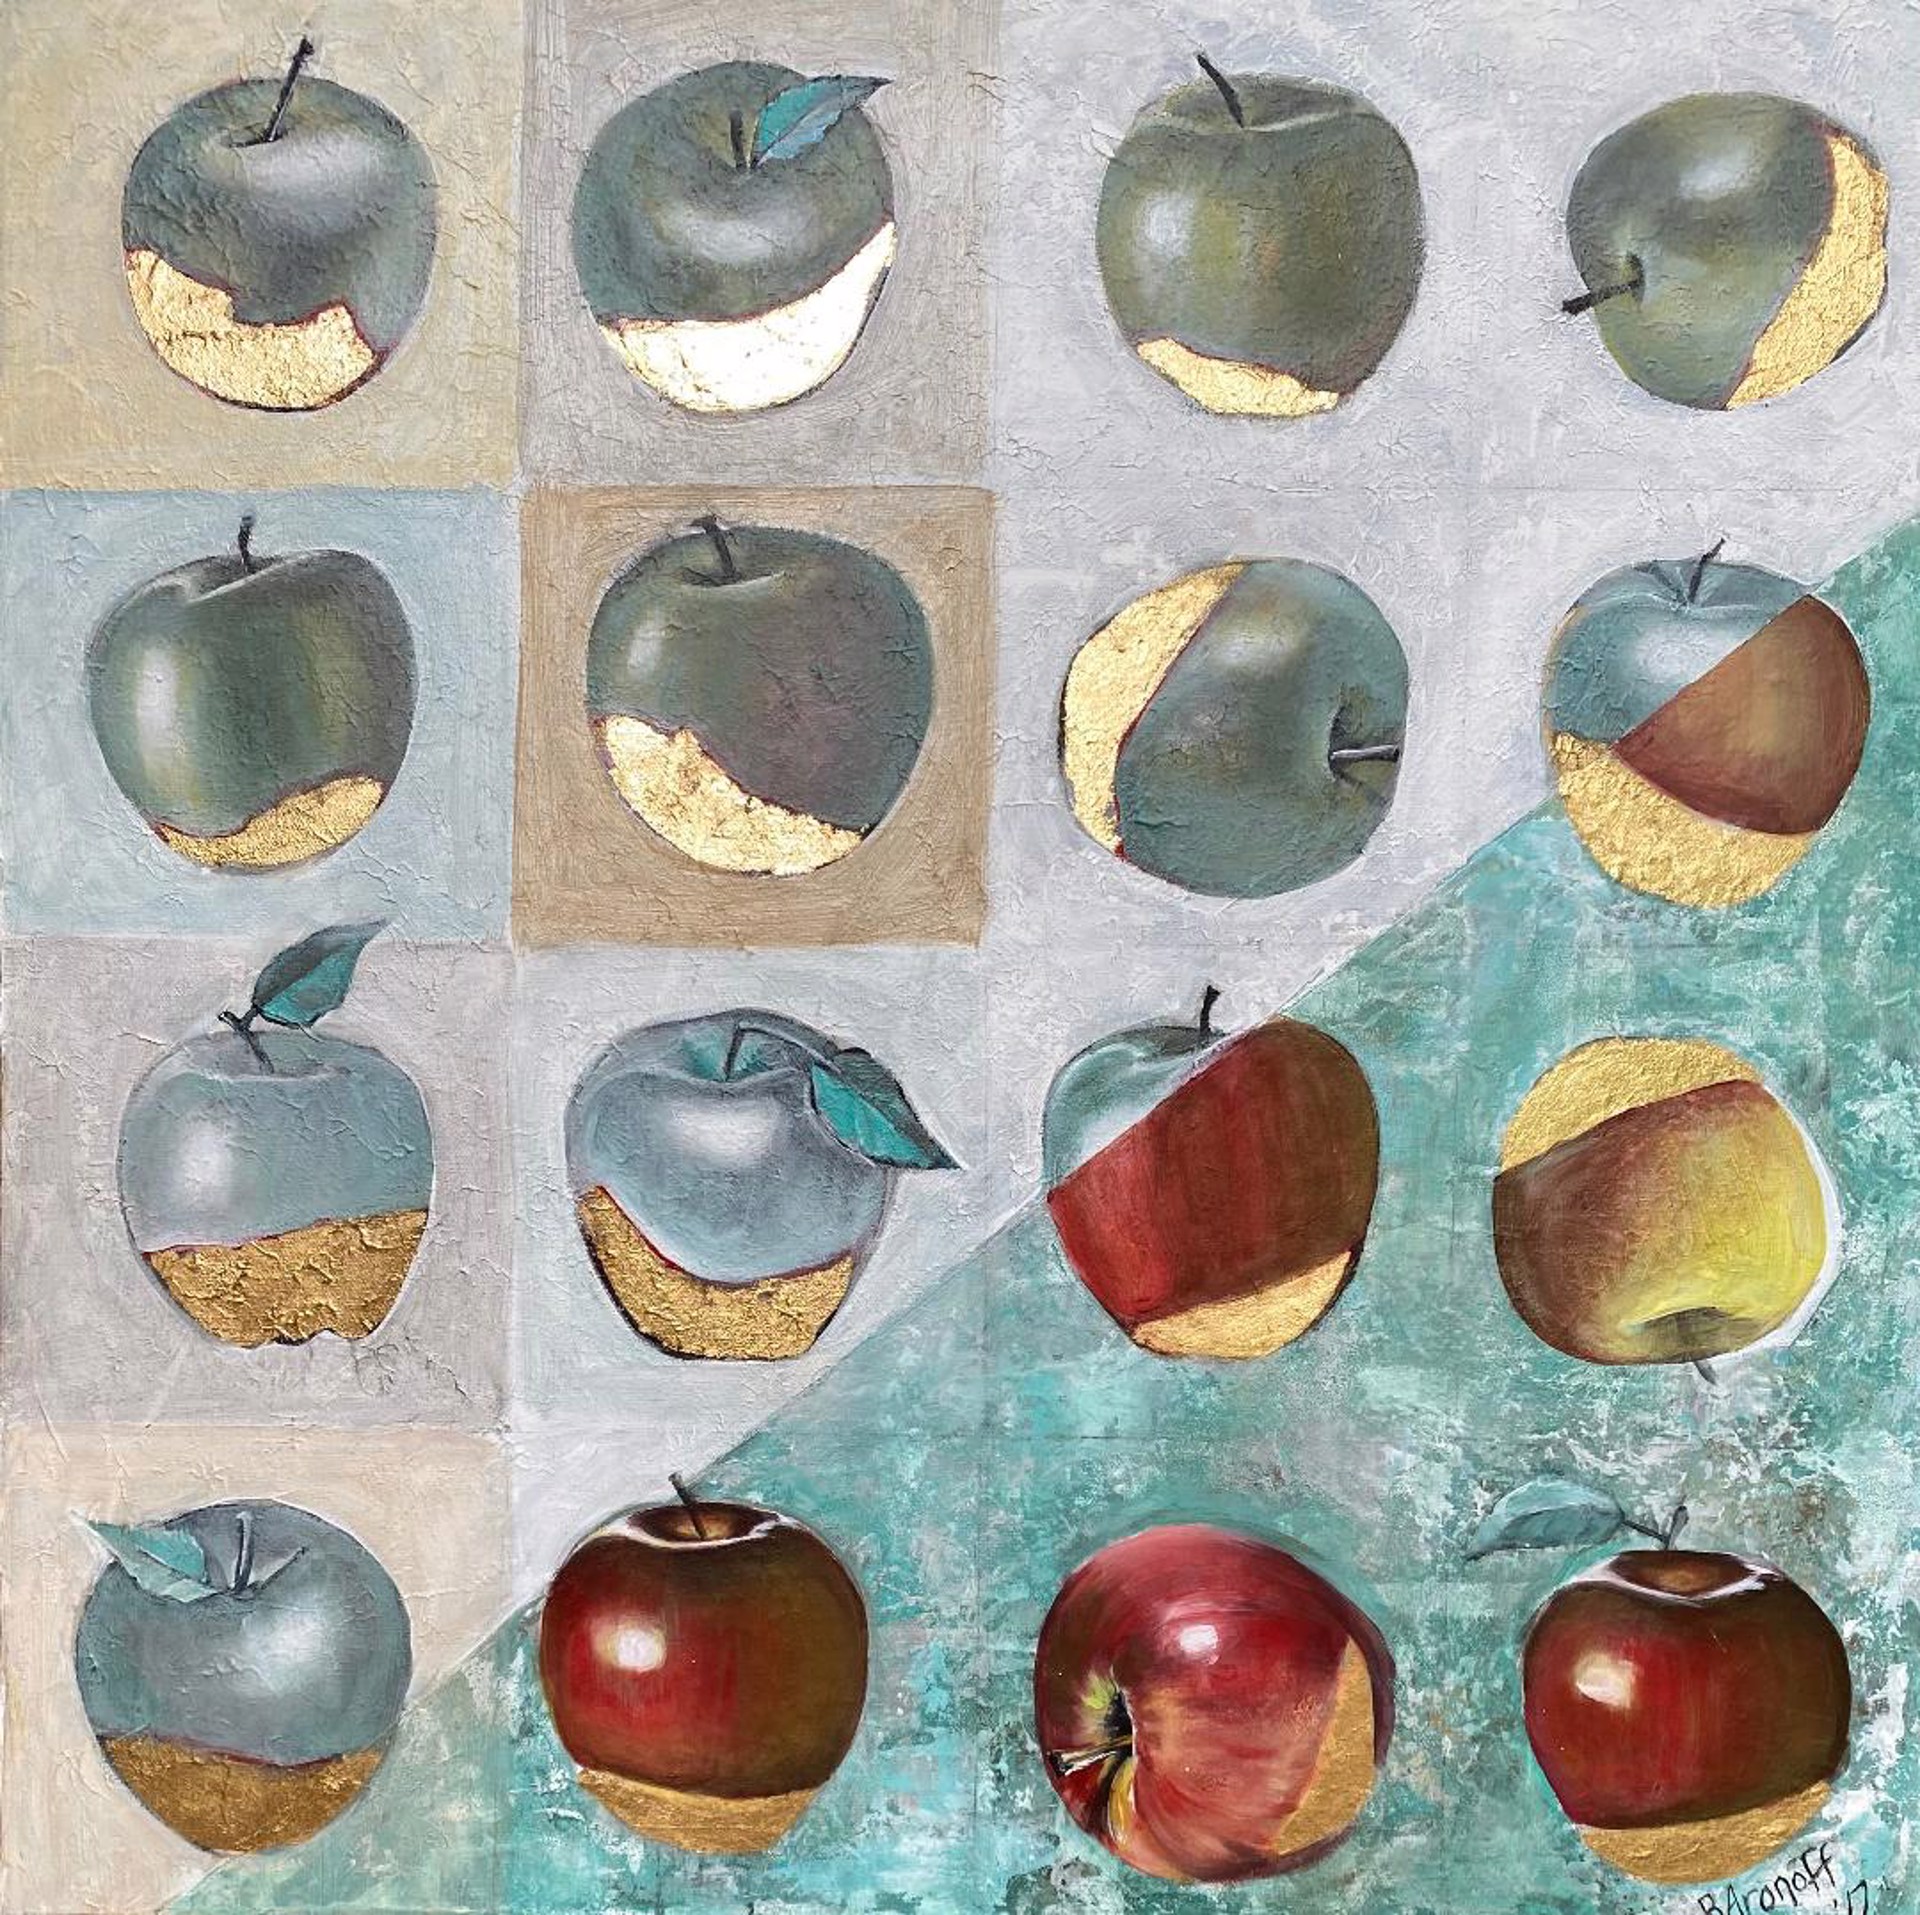 Delicious Apples by Beth Aronoff